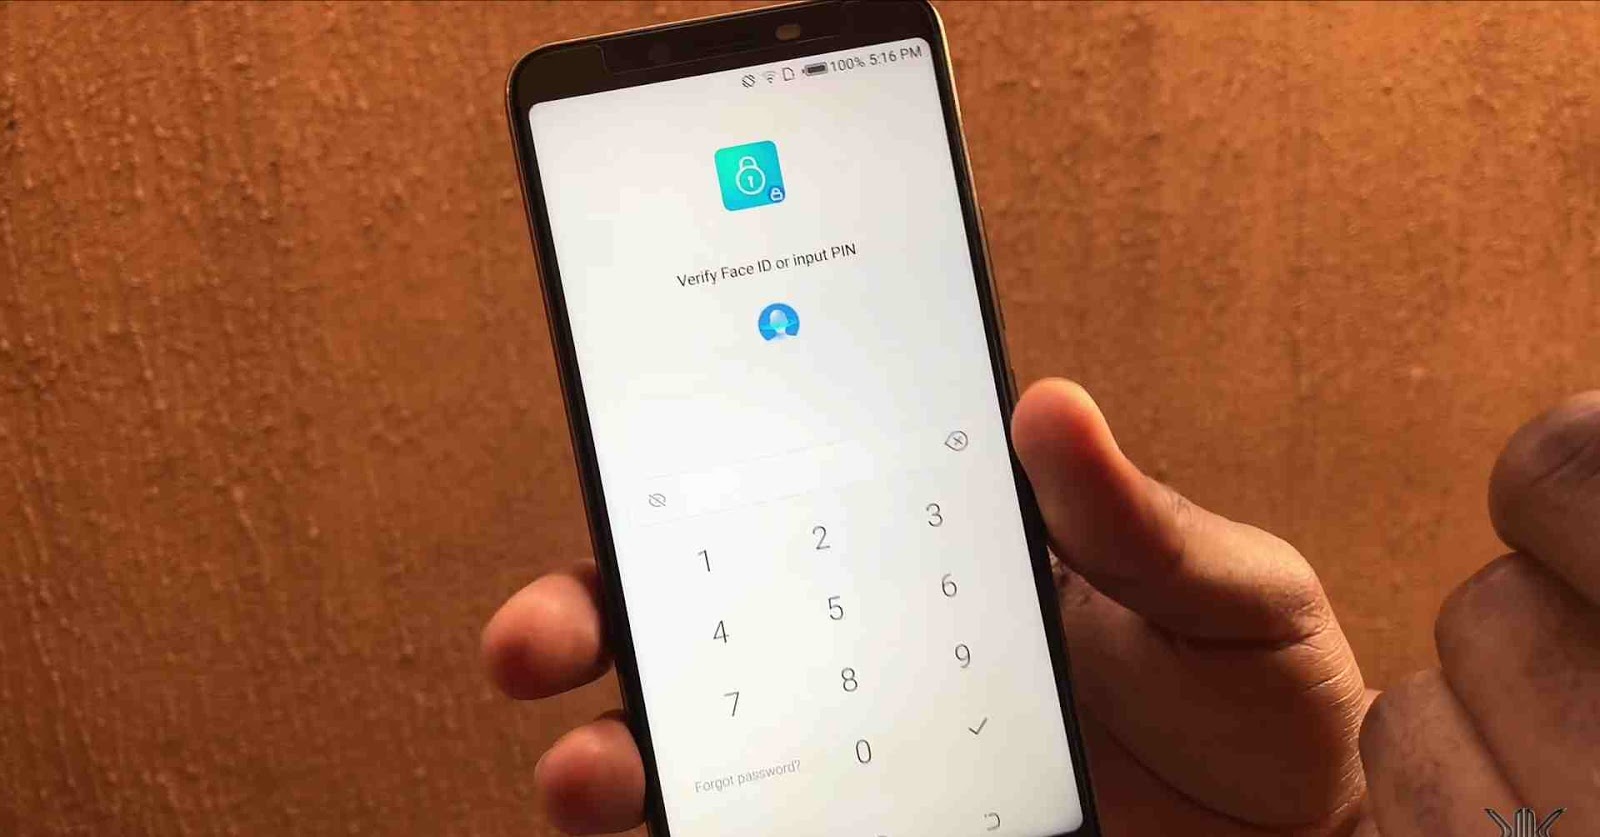 Verify your identity using Face ID or enter Pin to access app lock